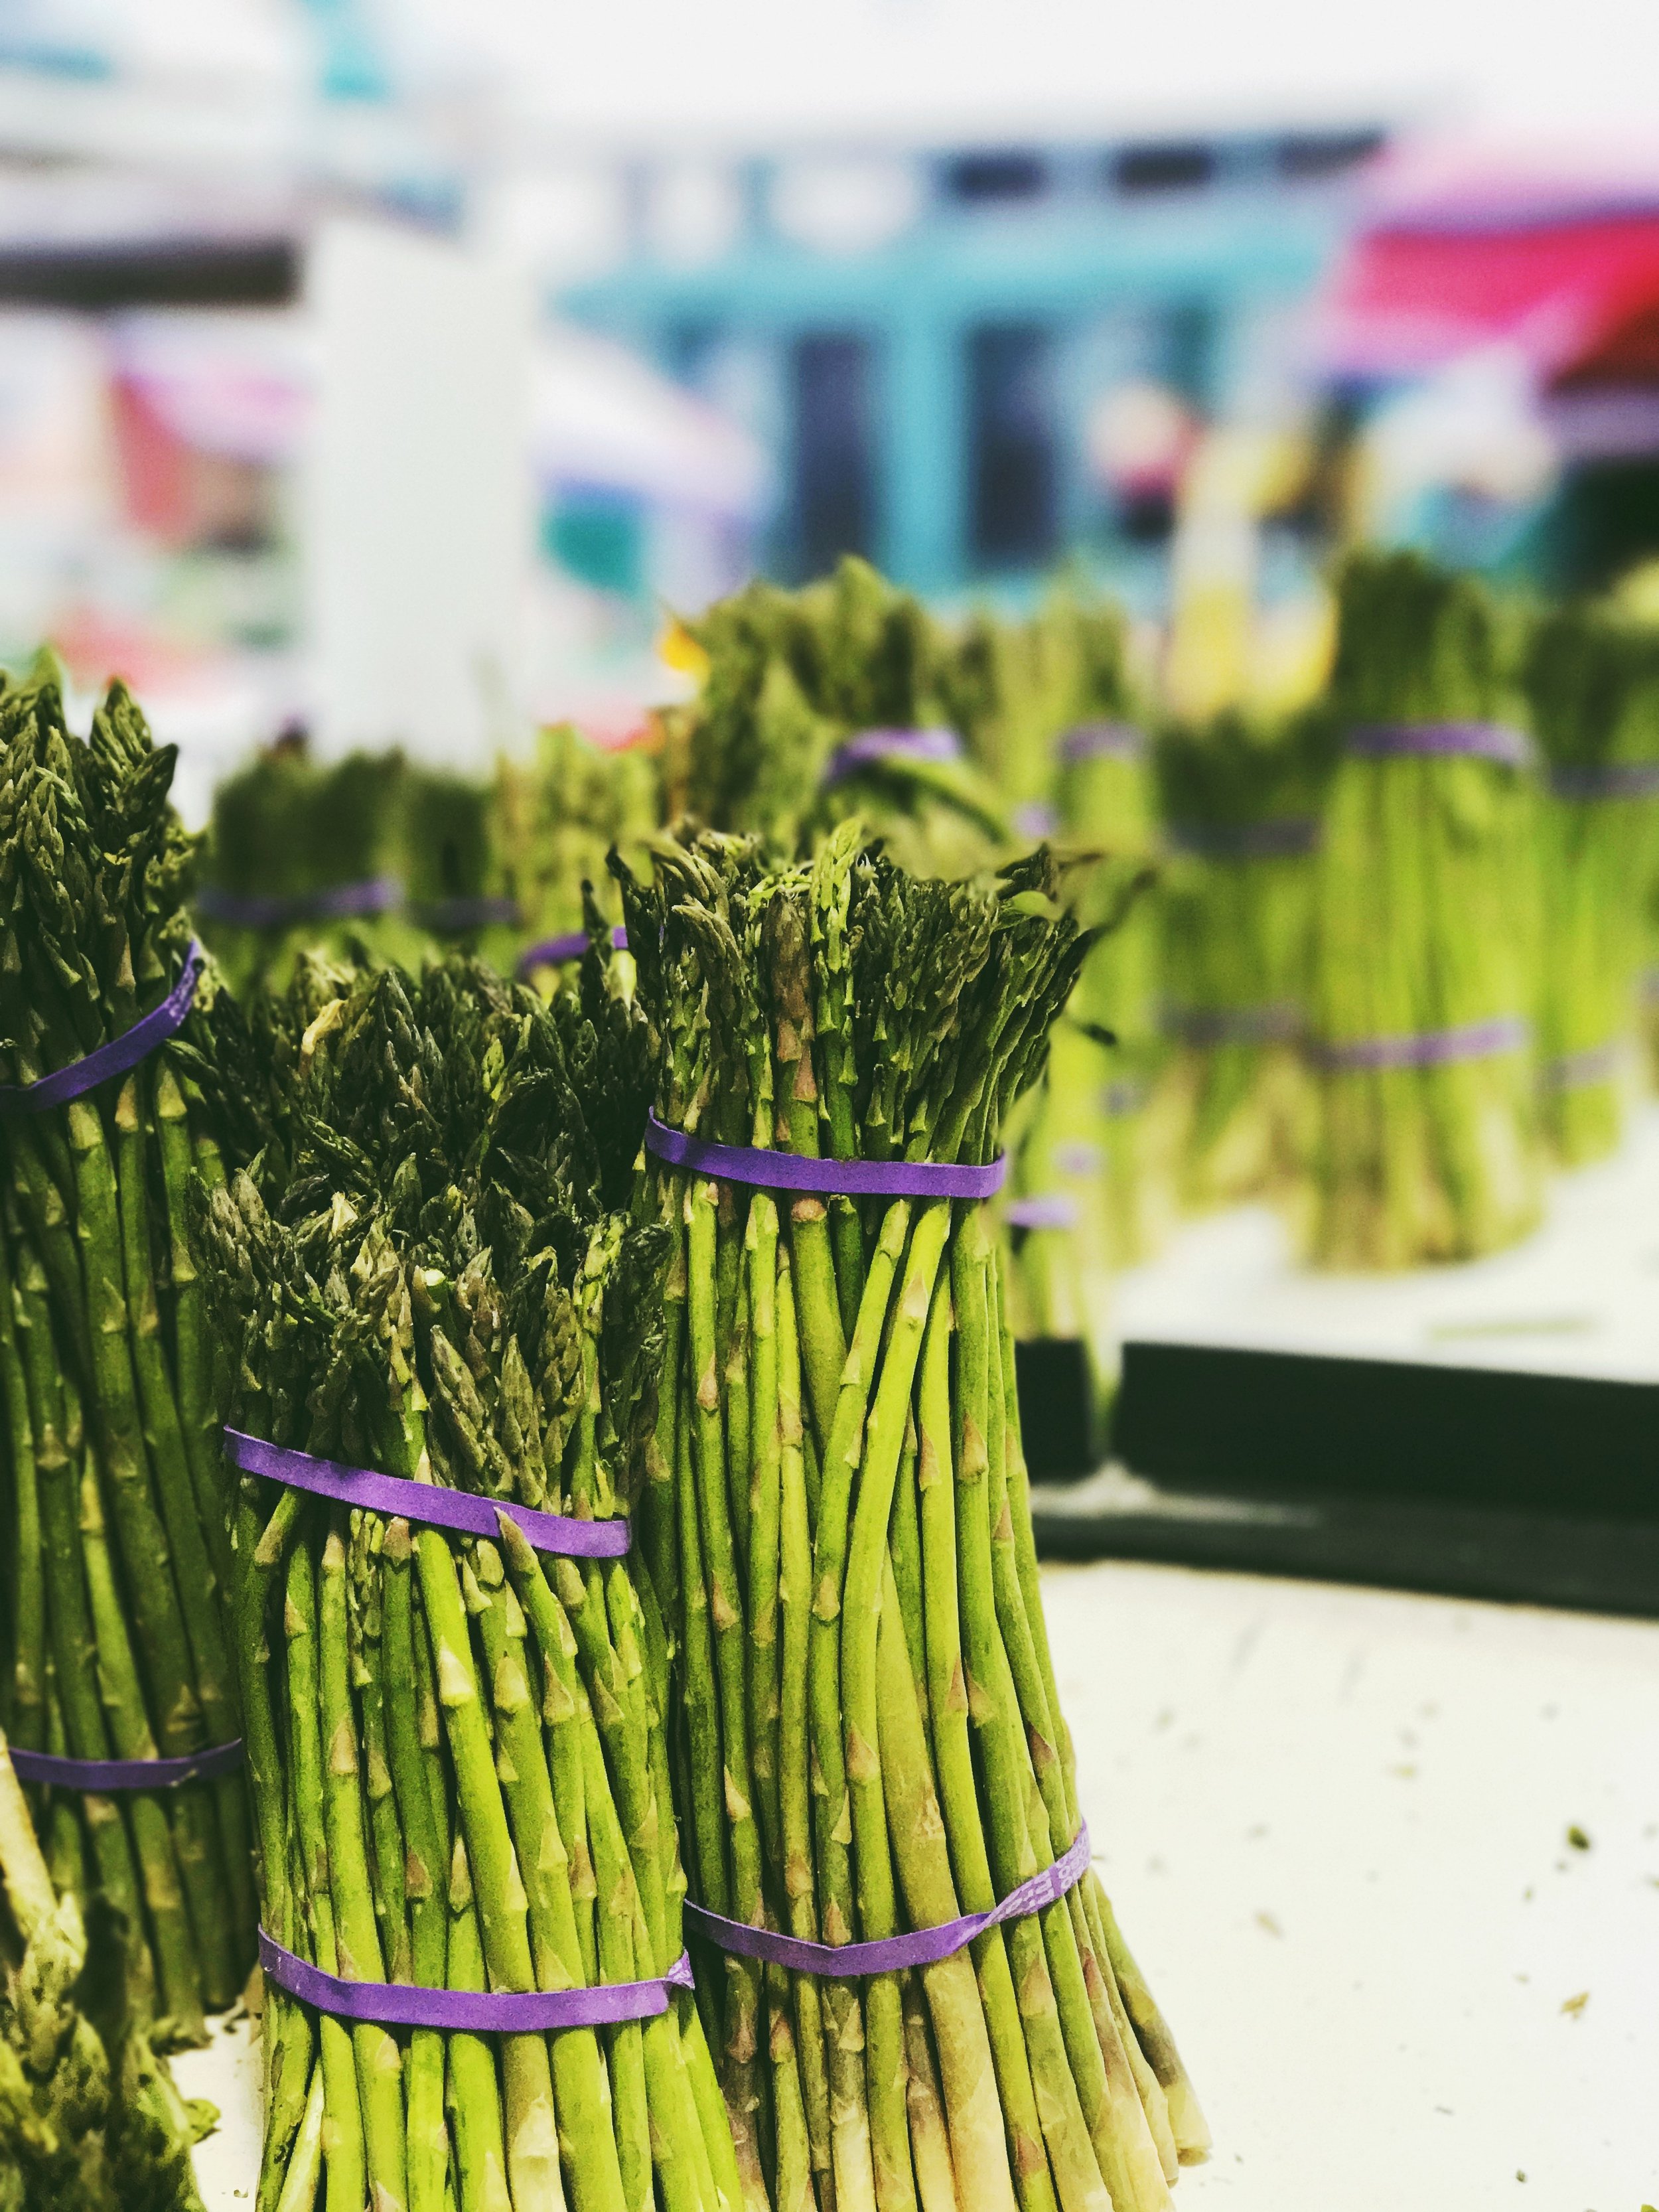 Asparagus at Marché Jean-Talon. Exposure 1/60 at f/2.8. Edited with VSCO.